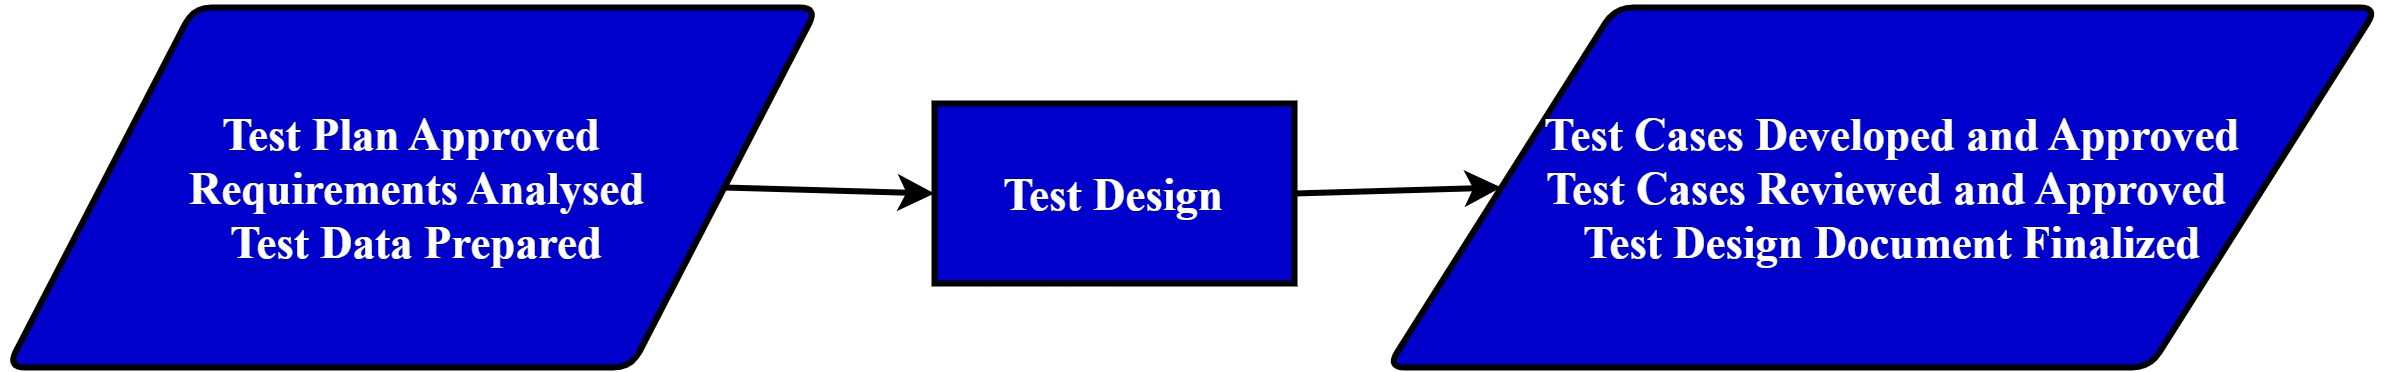 Entry and exit criteria for Test Design Phase